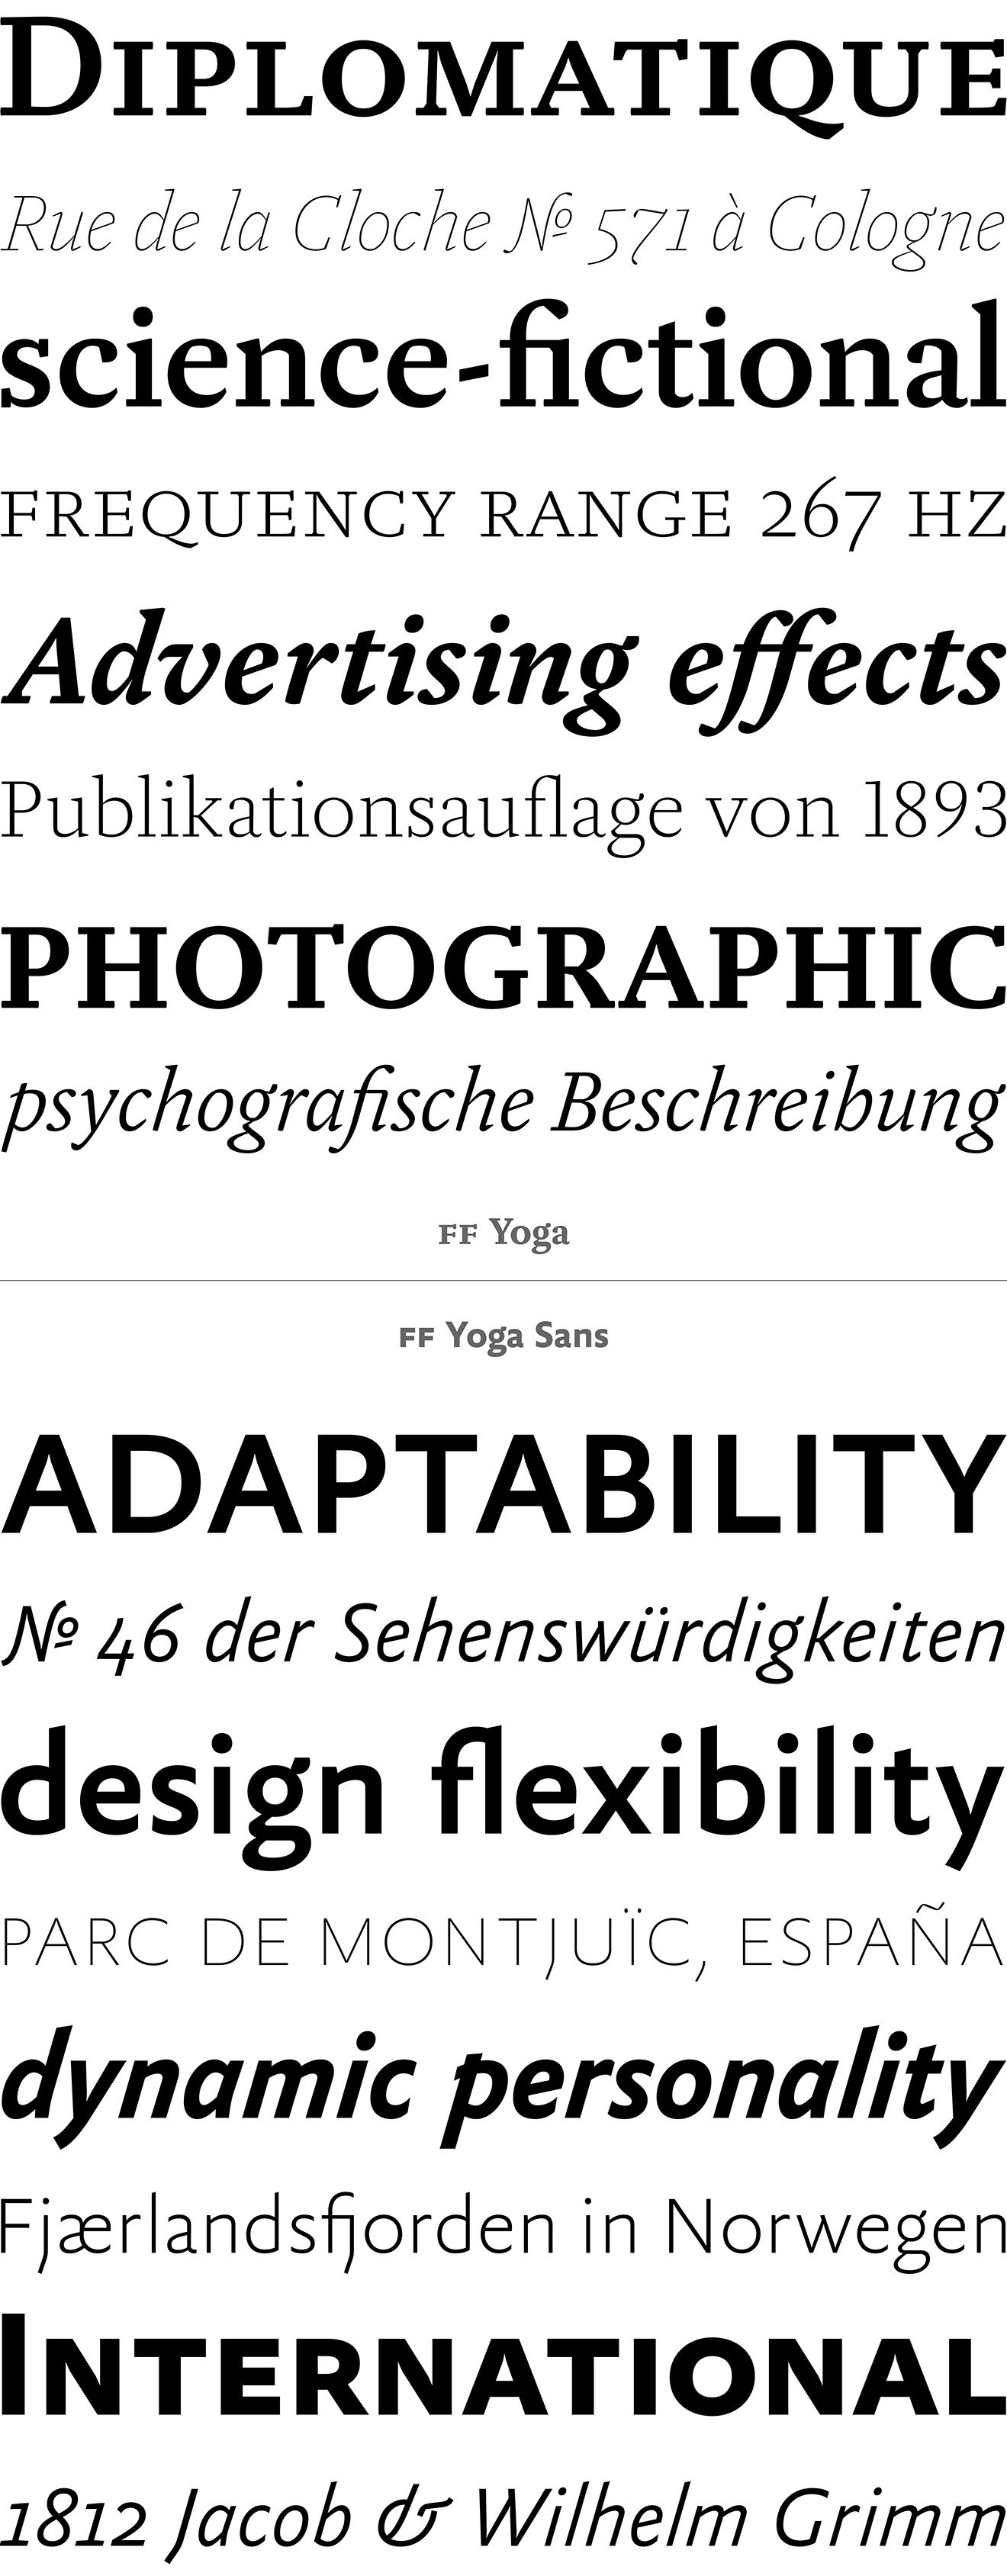 FF Yoga designer Xavier Dupré has taken the popular sans and serif typeface and turned it into quite the superfamily with the addition of Hairline, Thin, Light and Medium weights.